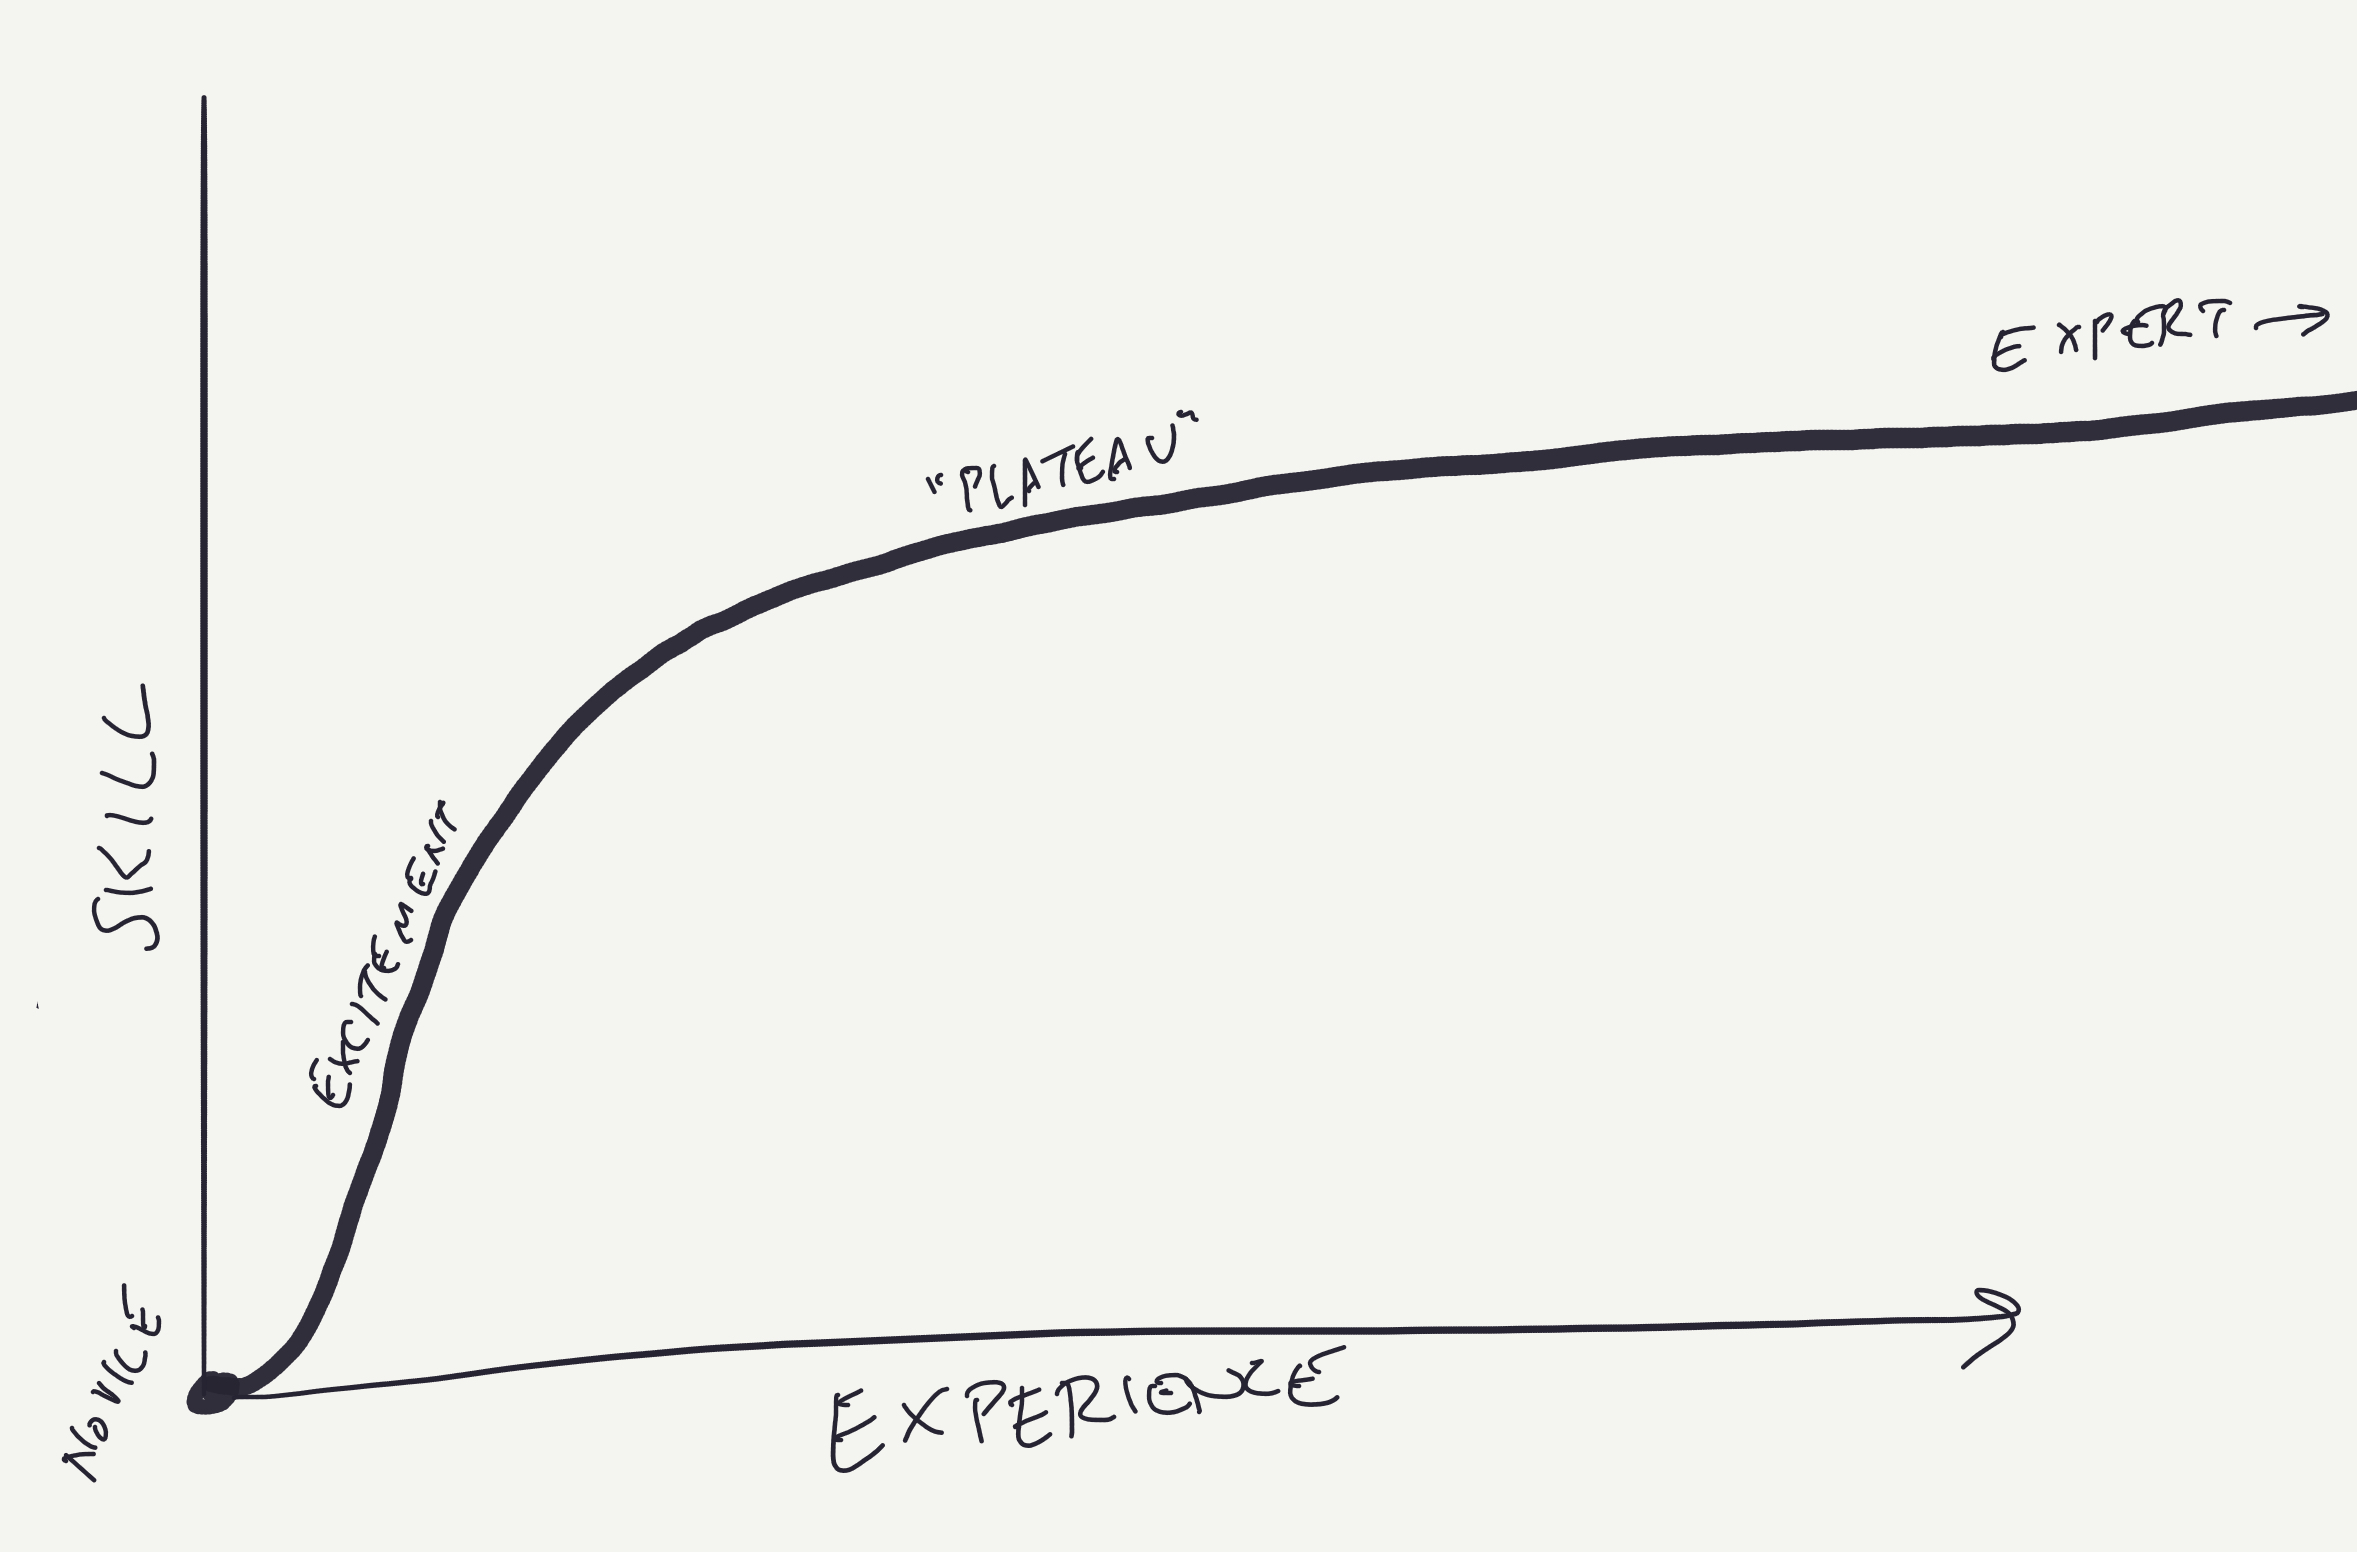 Sigmoid curve of increasing skill, novice to excited to plateau to expert